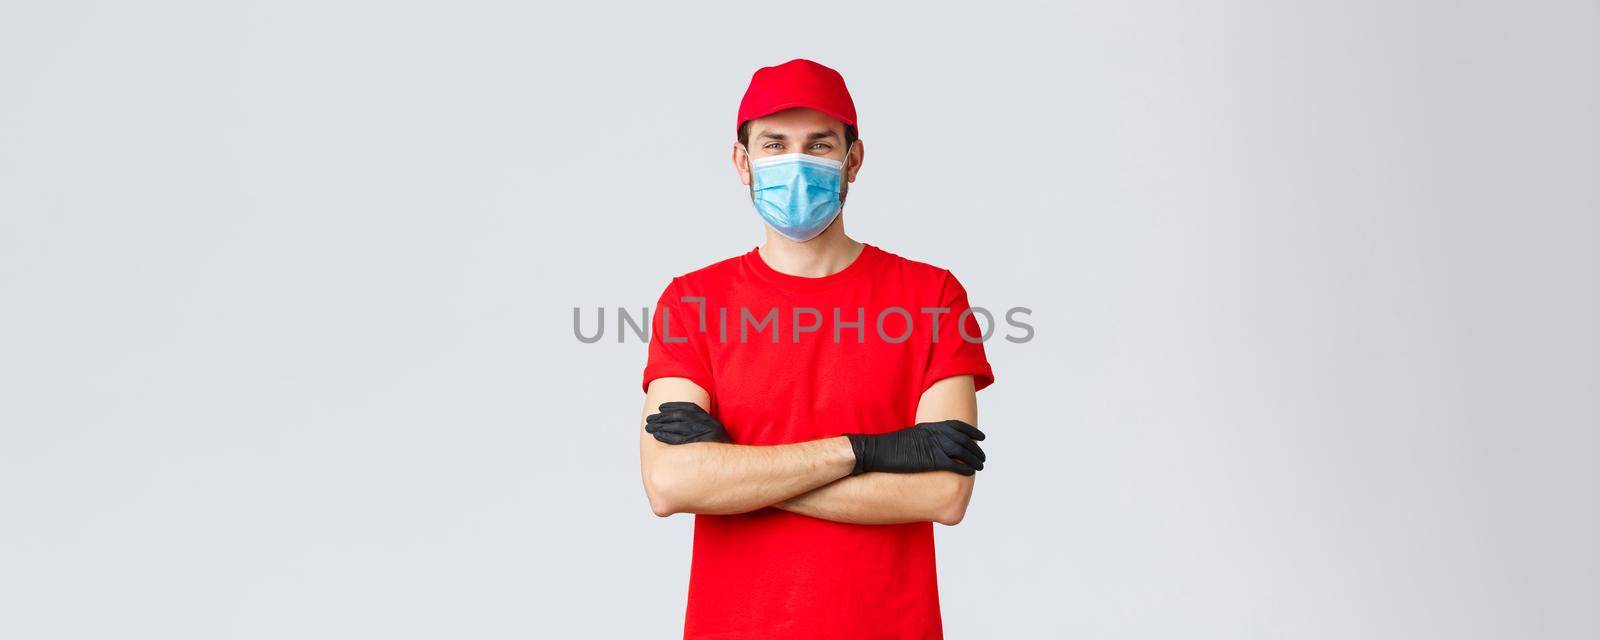 Covid-19, self-quarantine, online shopping and shipping concept. Confident smiling delivery man in red cap, t-shirt, wearing protective medical mask and rubber gloves while making courier order.